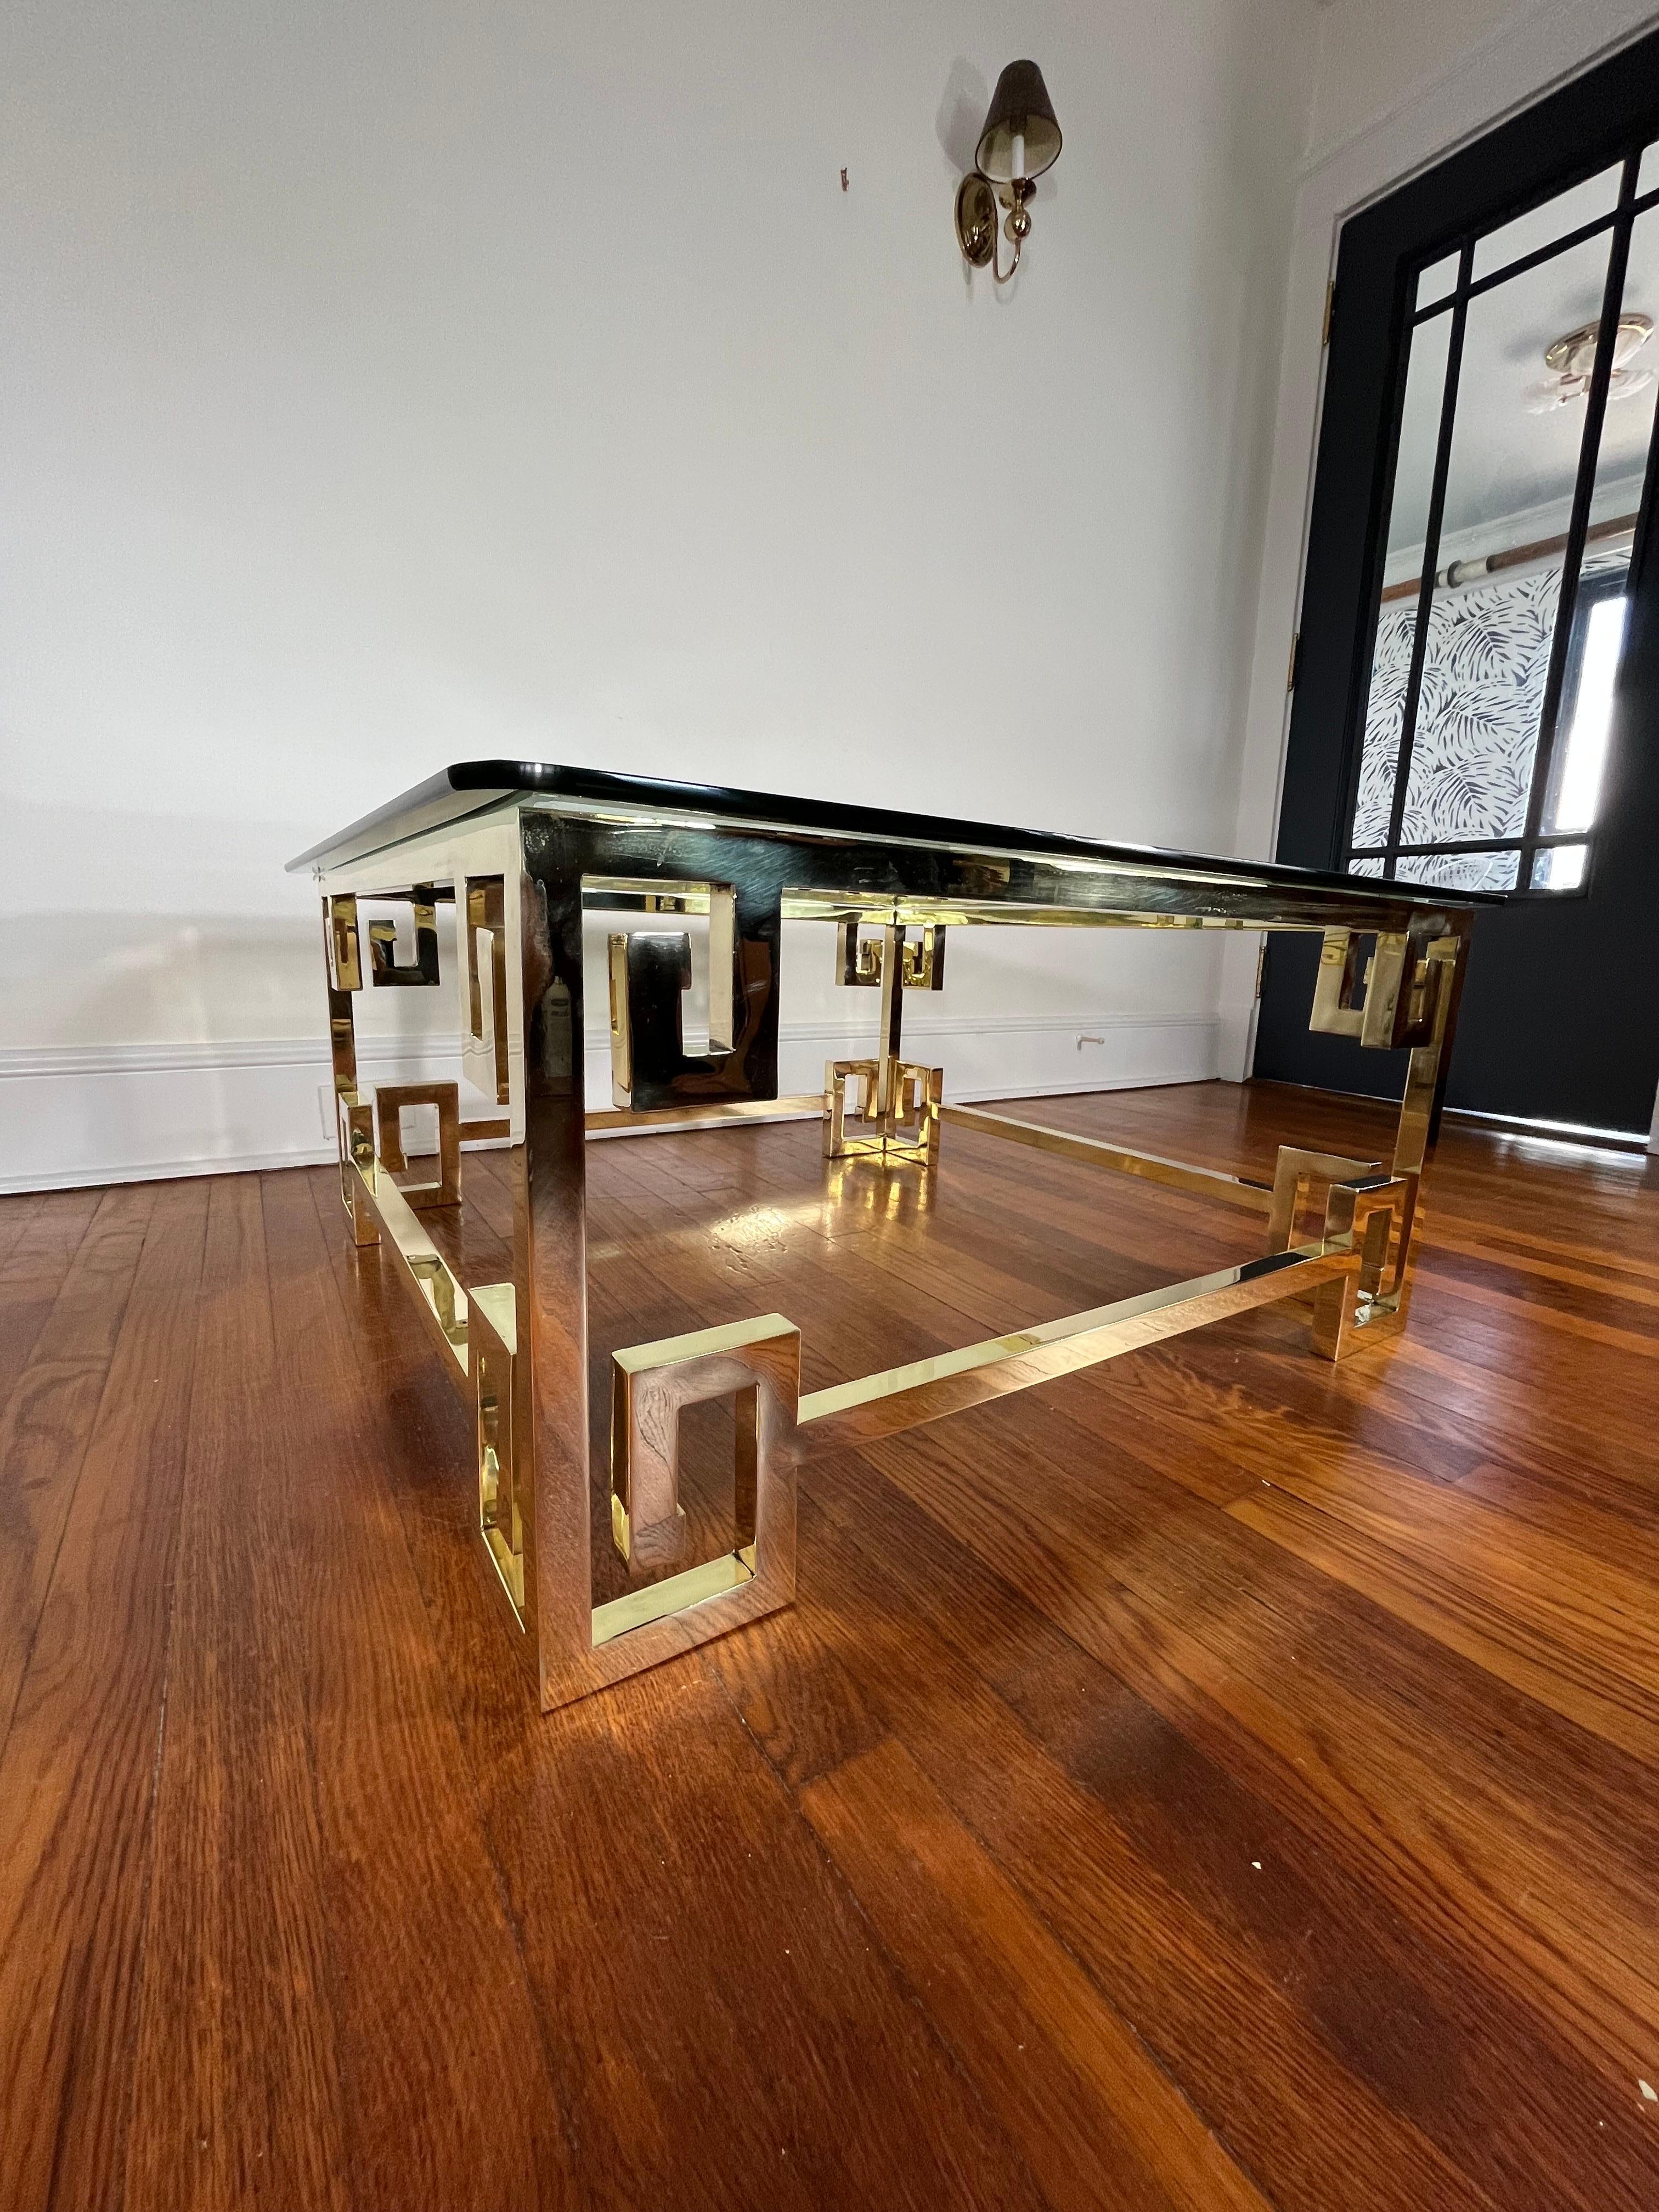 Mastercraft Brass coffee table greek key accent In Good Condition For Sale In W Allenhurst, NJ